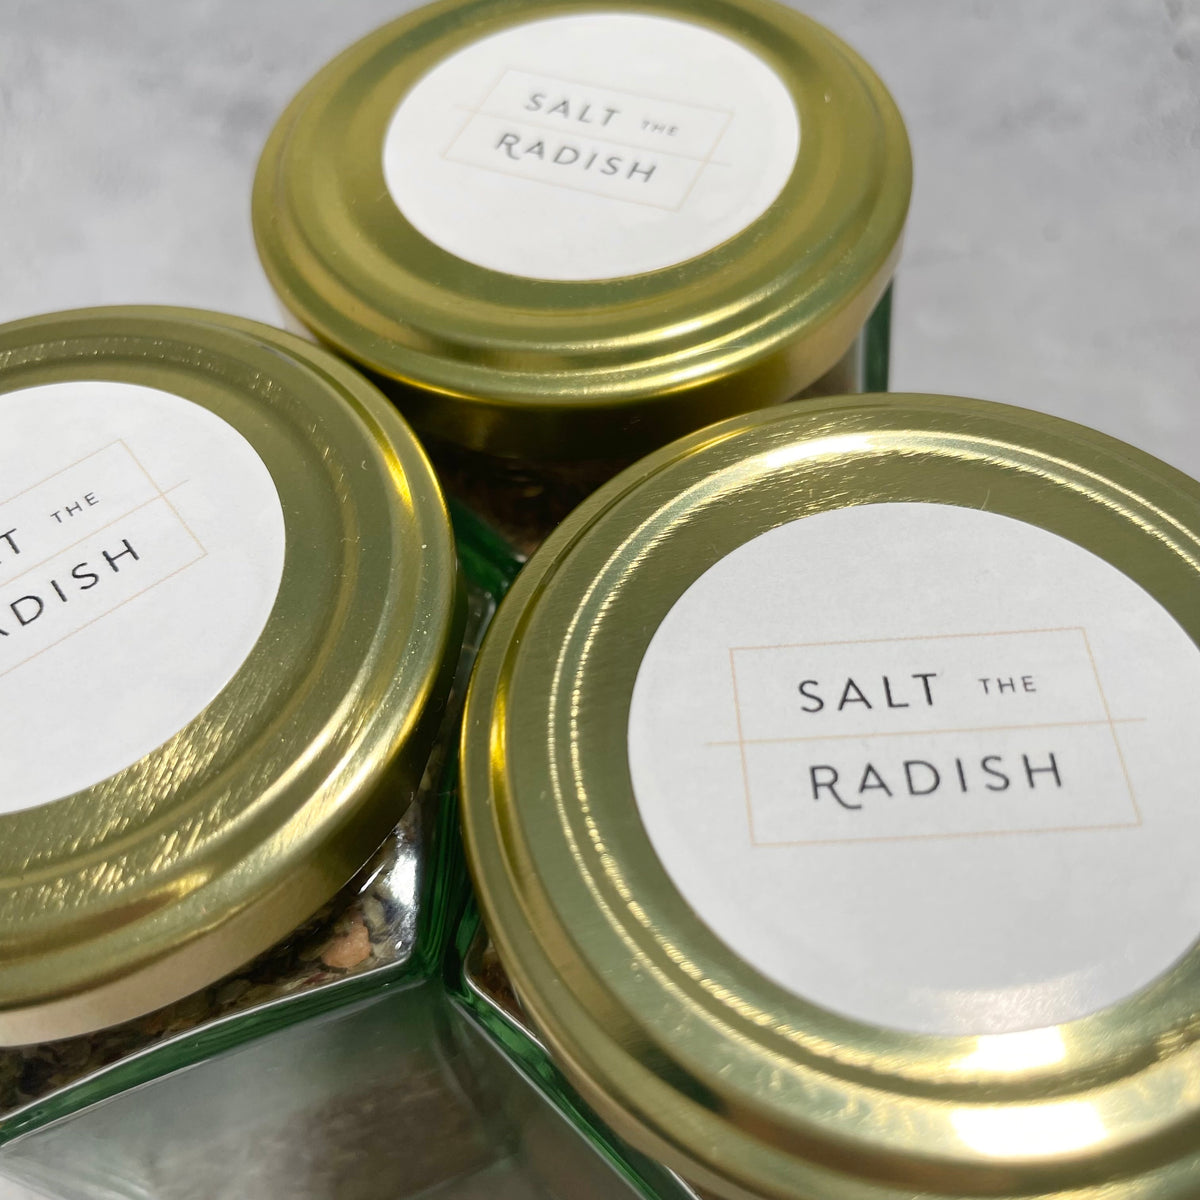 Top view of three spice jars next to each other showing the Salt the Radish logo on a sticker.